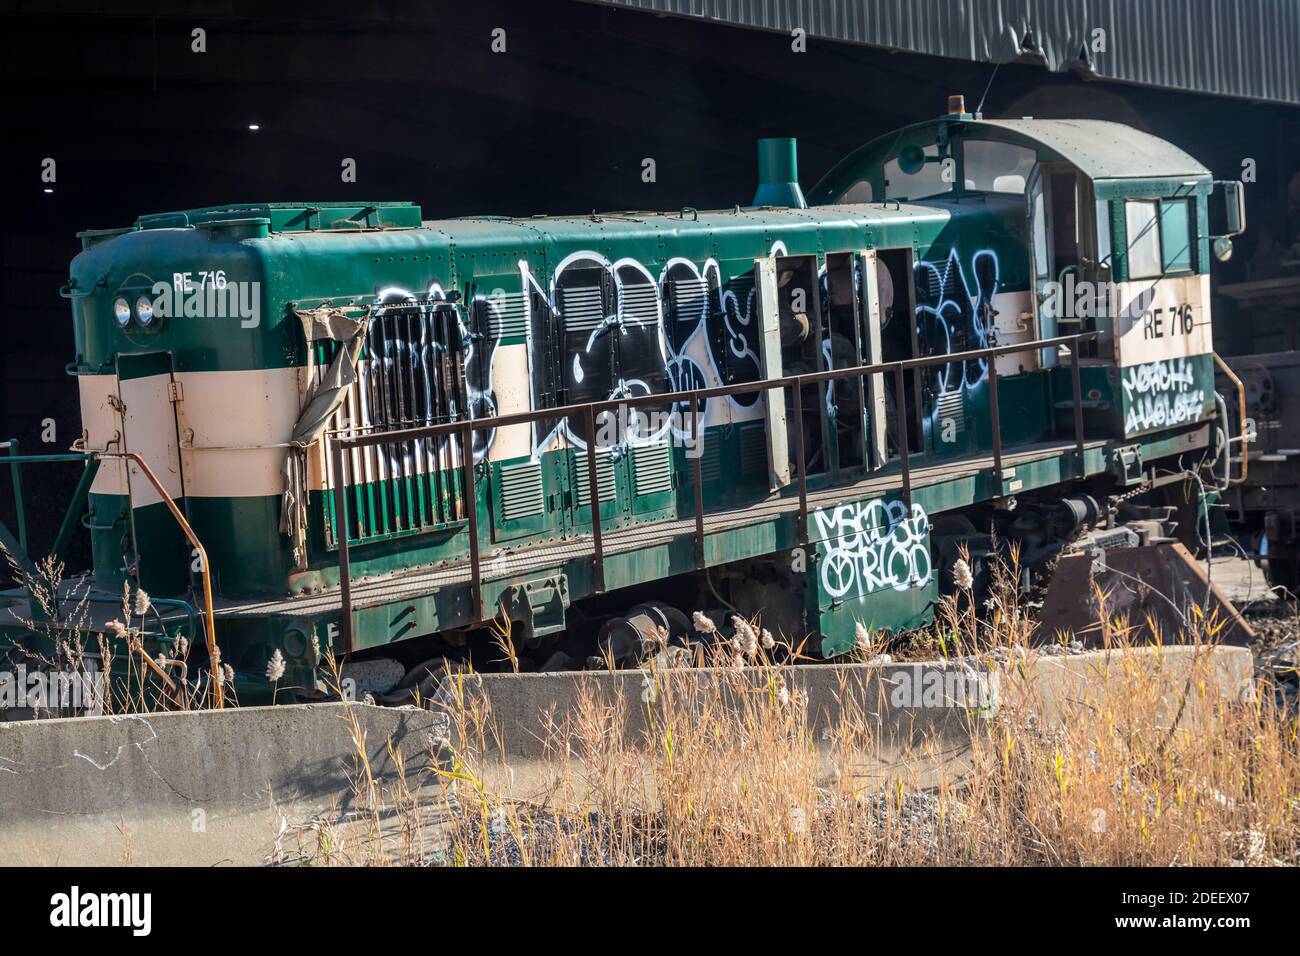 Detroit, Michigan - A scrapped Alco railroad locomotive outside Strong Steel Products' recycling yard. Stock Photo